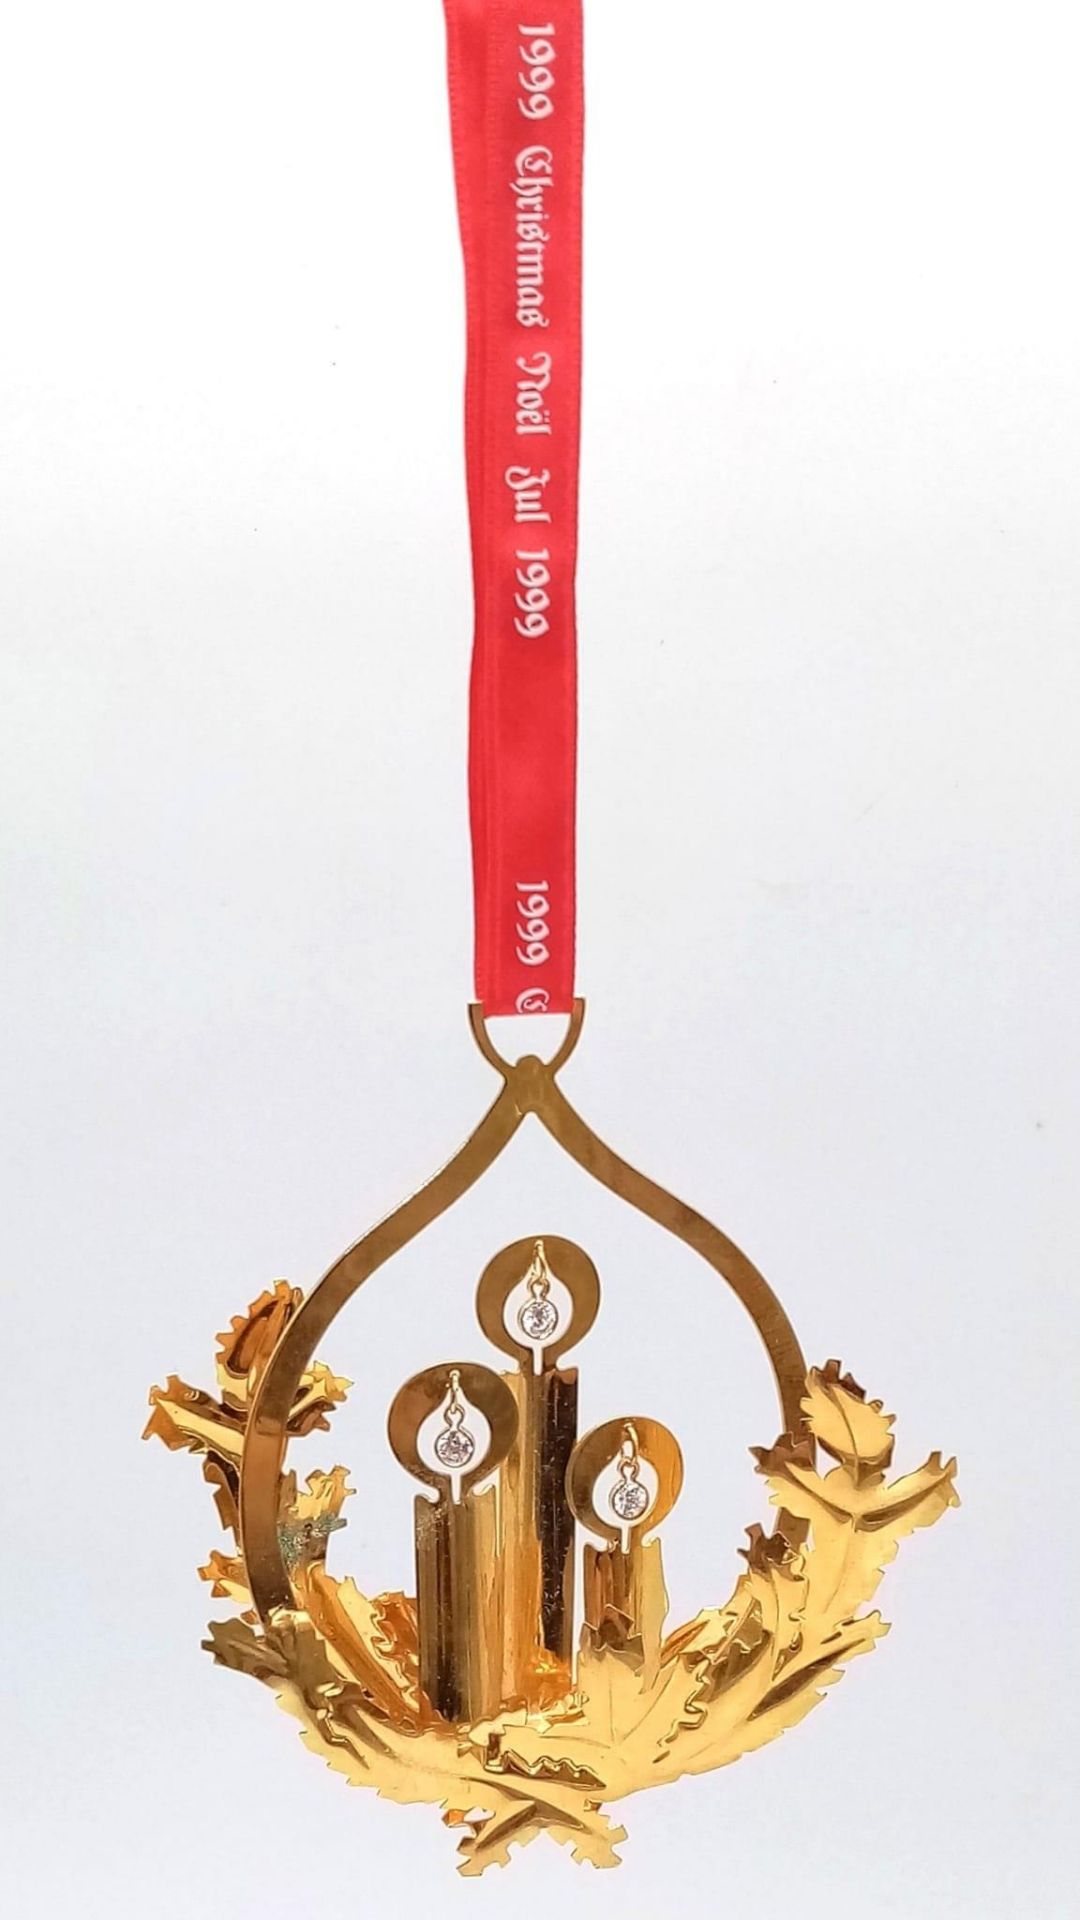 A Georg Jensen Gilded Christmas Ornament. 9cm x 12cm. On a hanging red ribbon. Comes in original